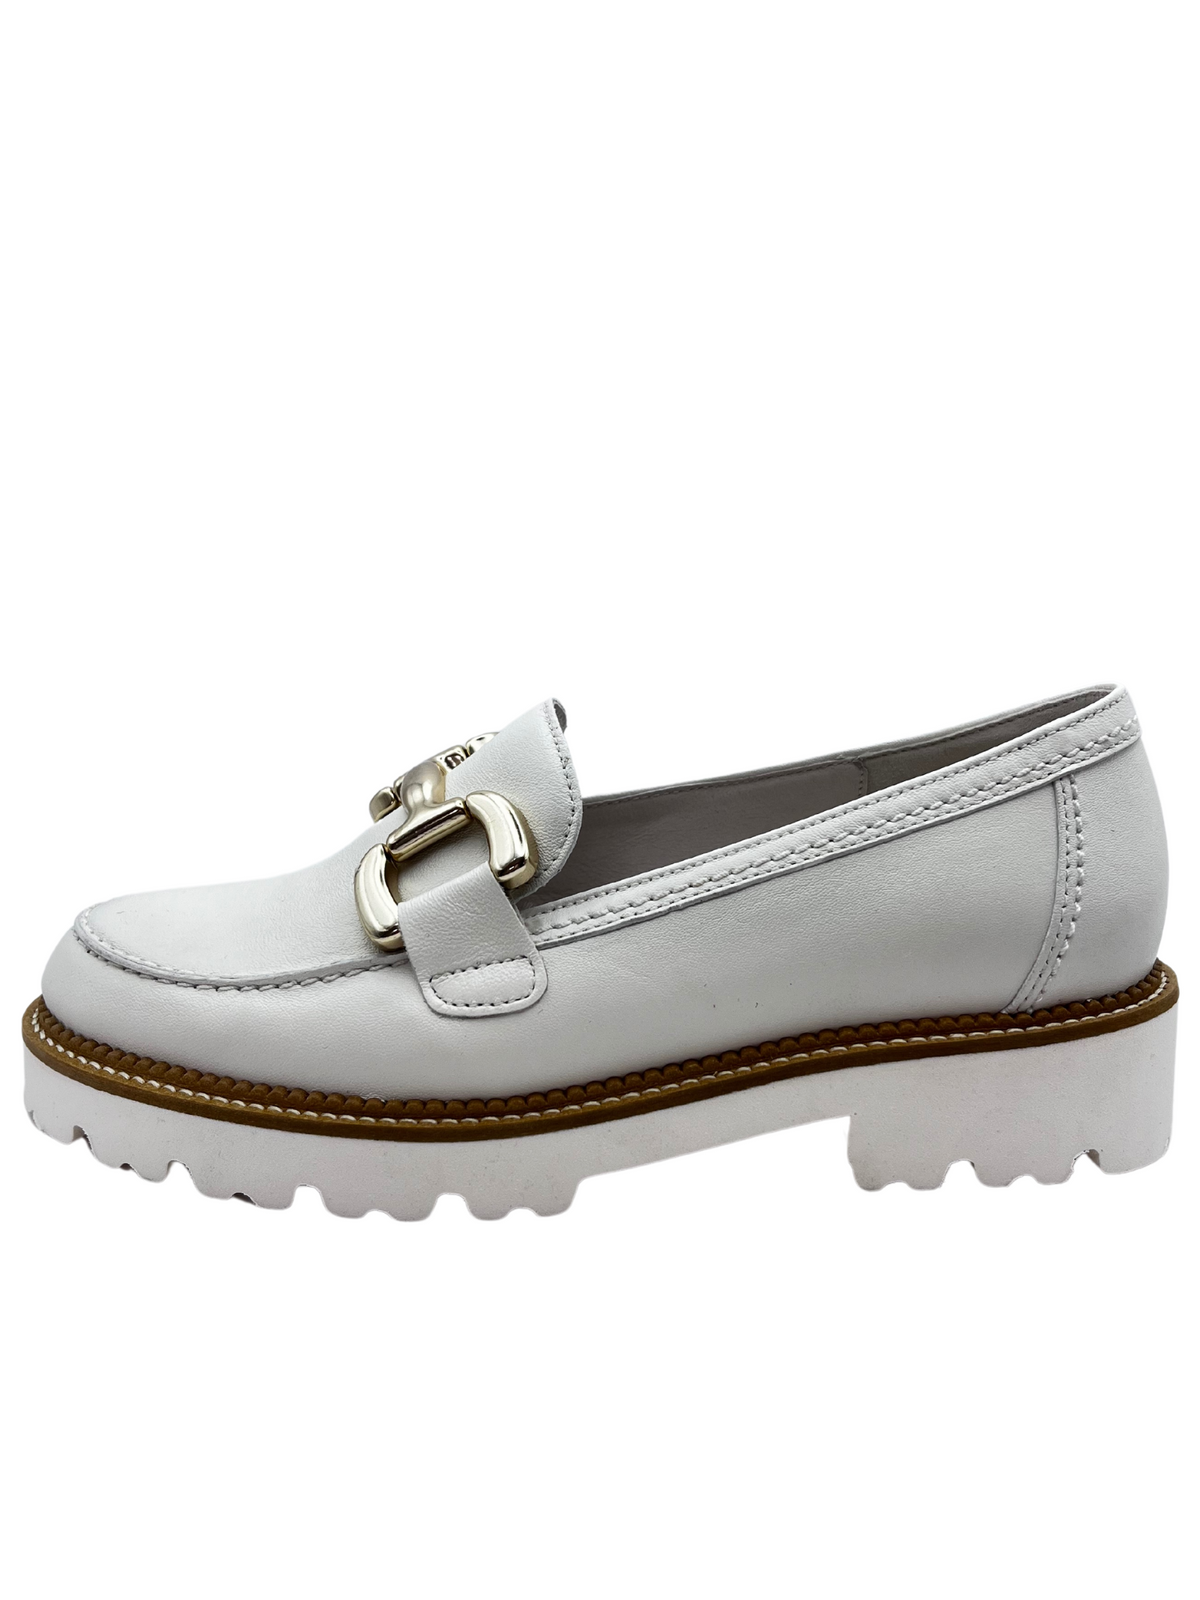 Gabor White Leather Loafer With Gold Chain Detail